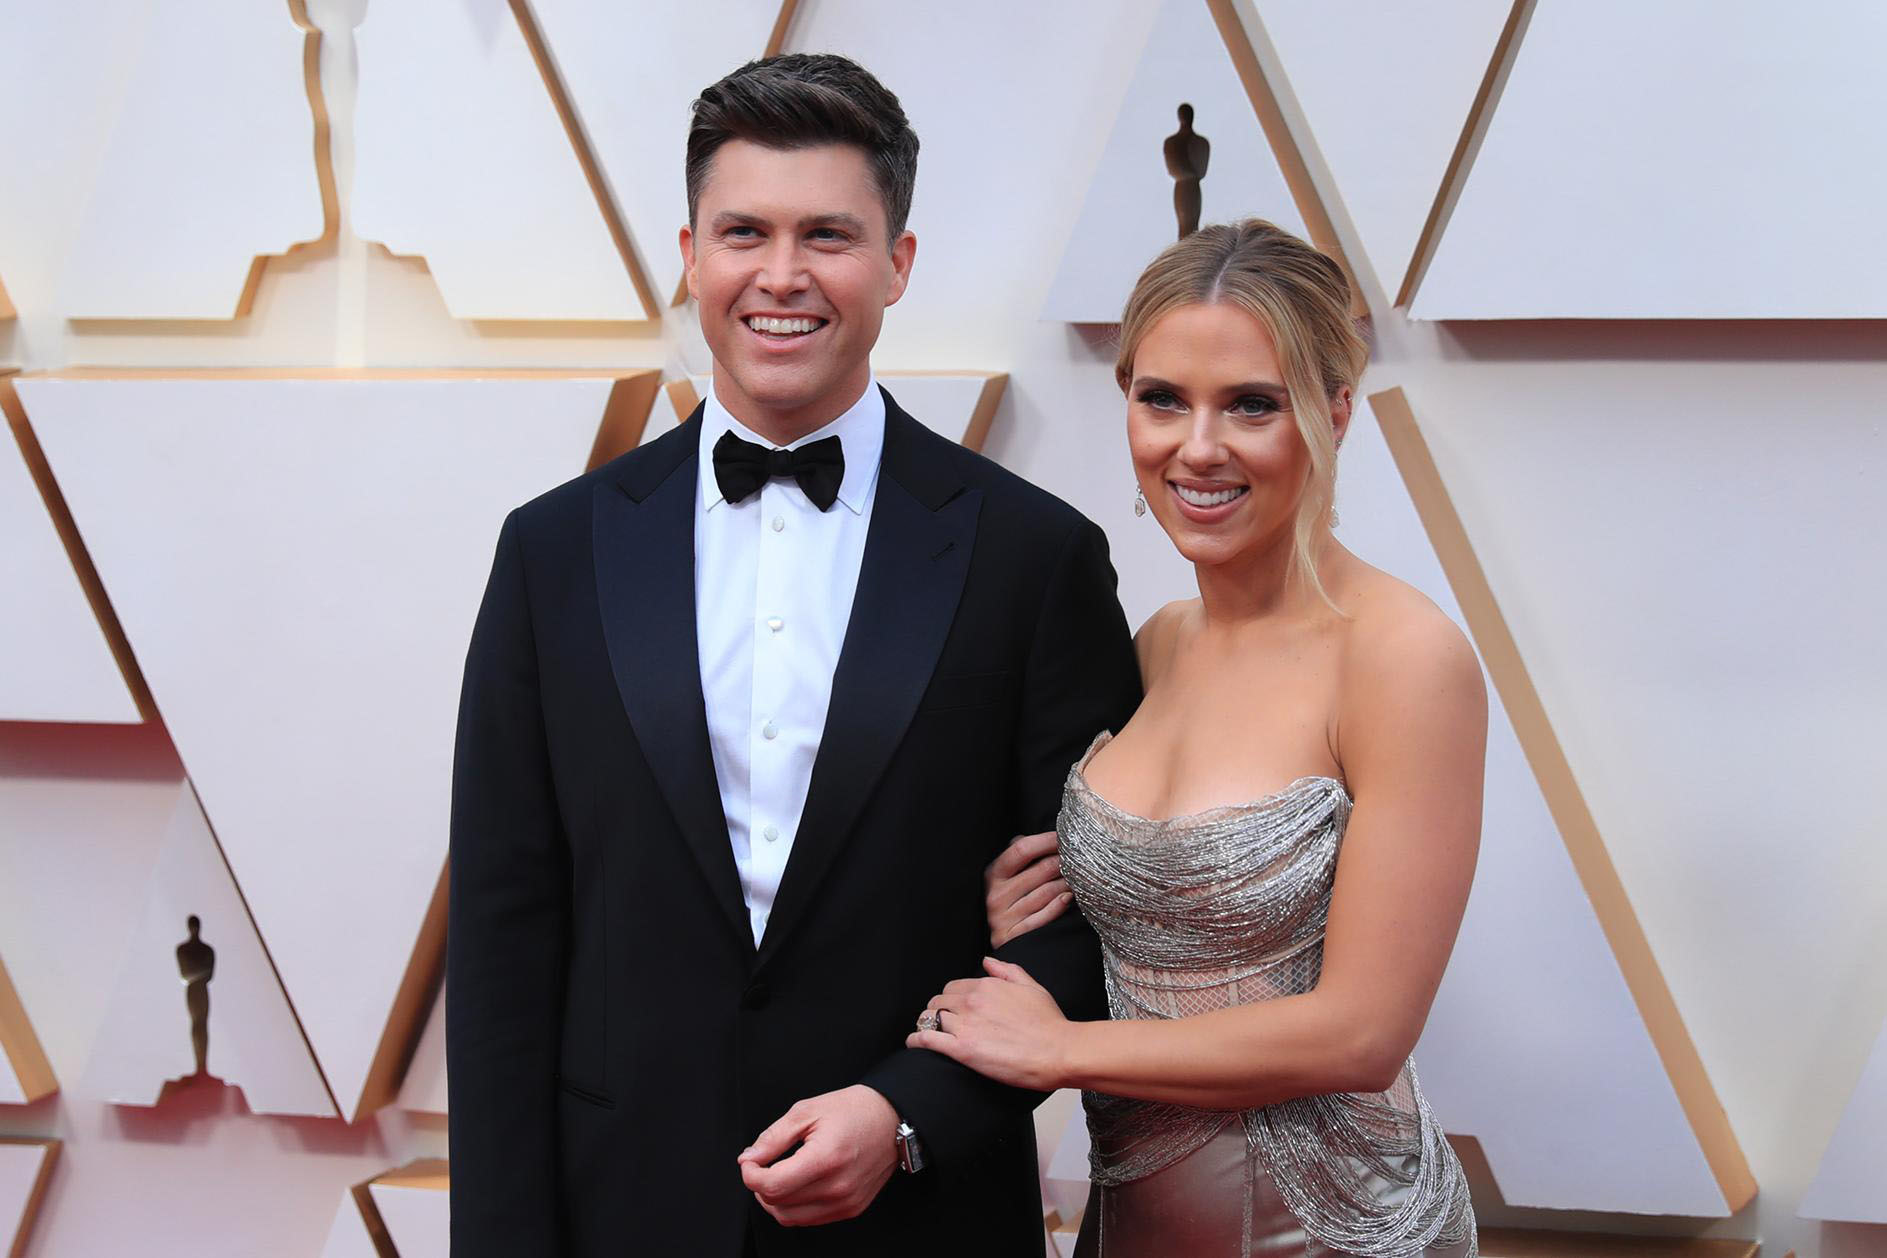 Scarlett Johansson  and Colin Jost pose on the 92nd Academy Awards red carpet on February 9, 2020